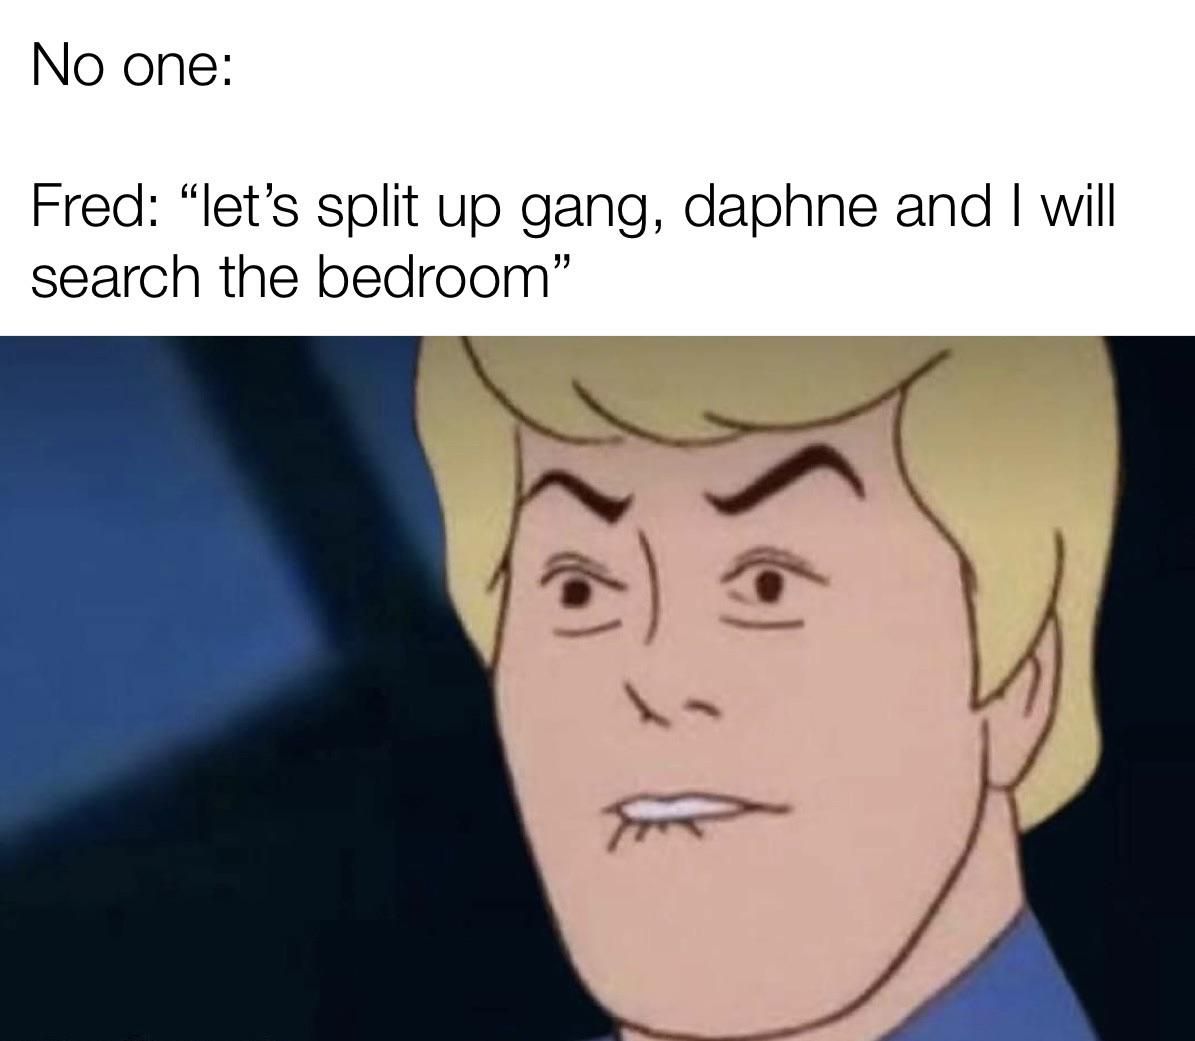 Scooby-doo would be upset